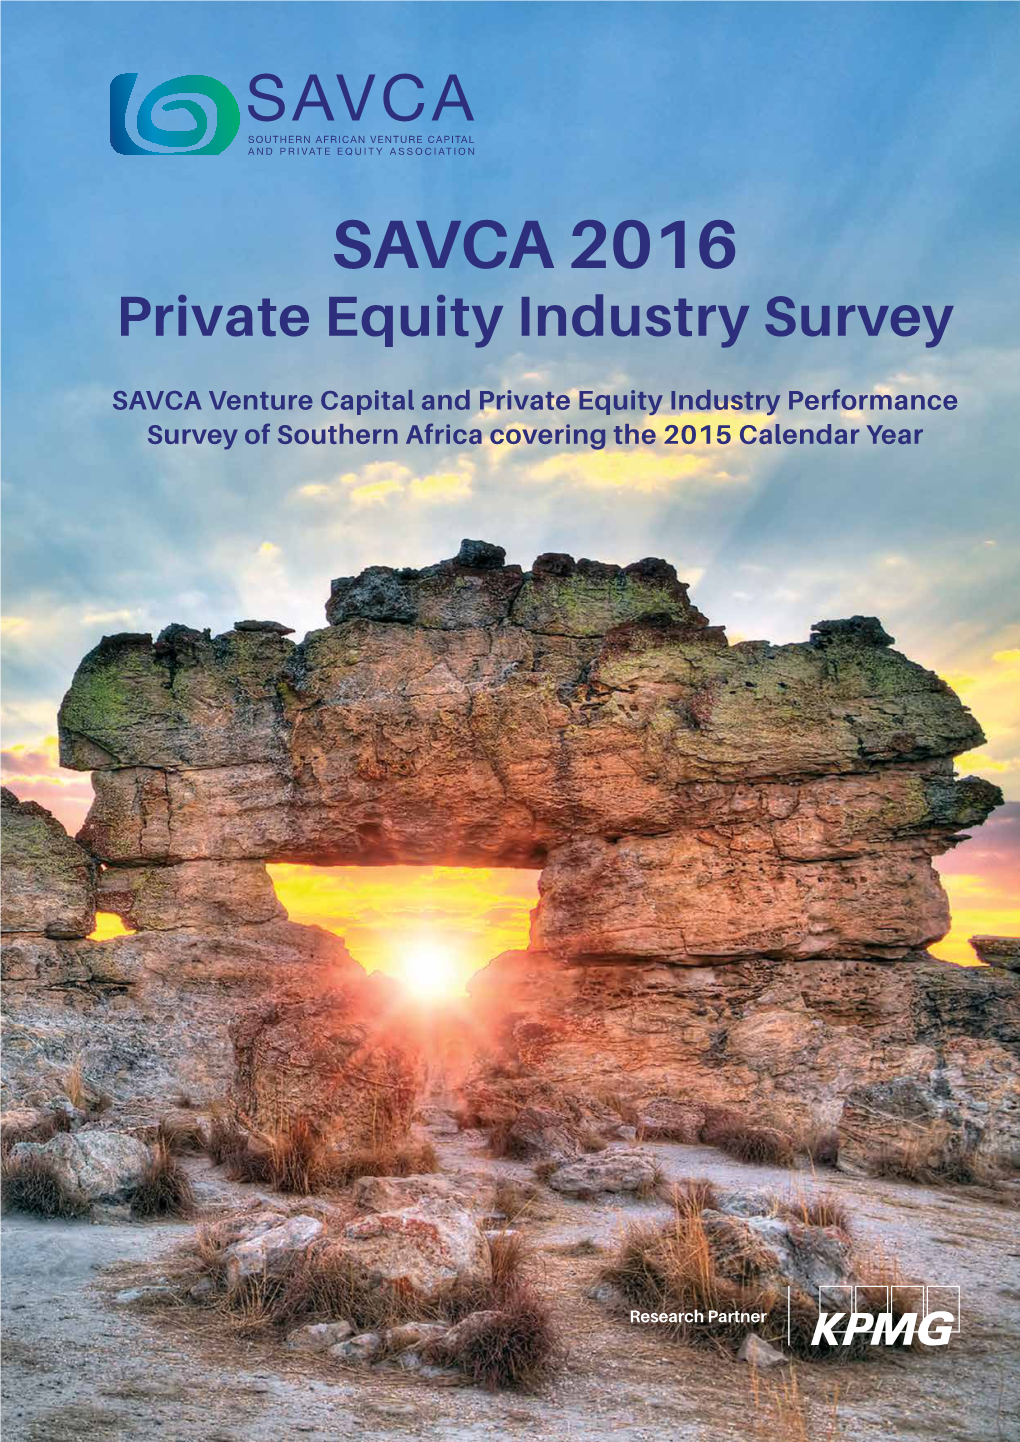 SAVCA 2016 Private Equity Industry Survey